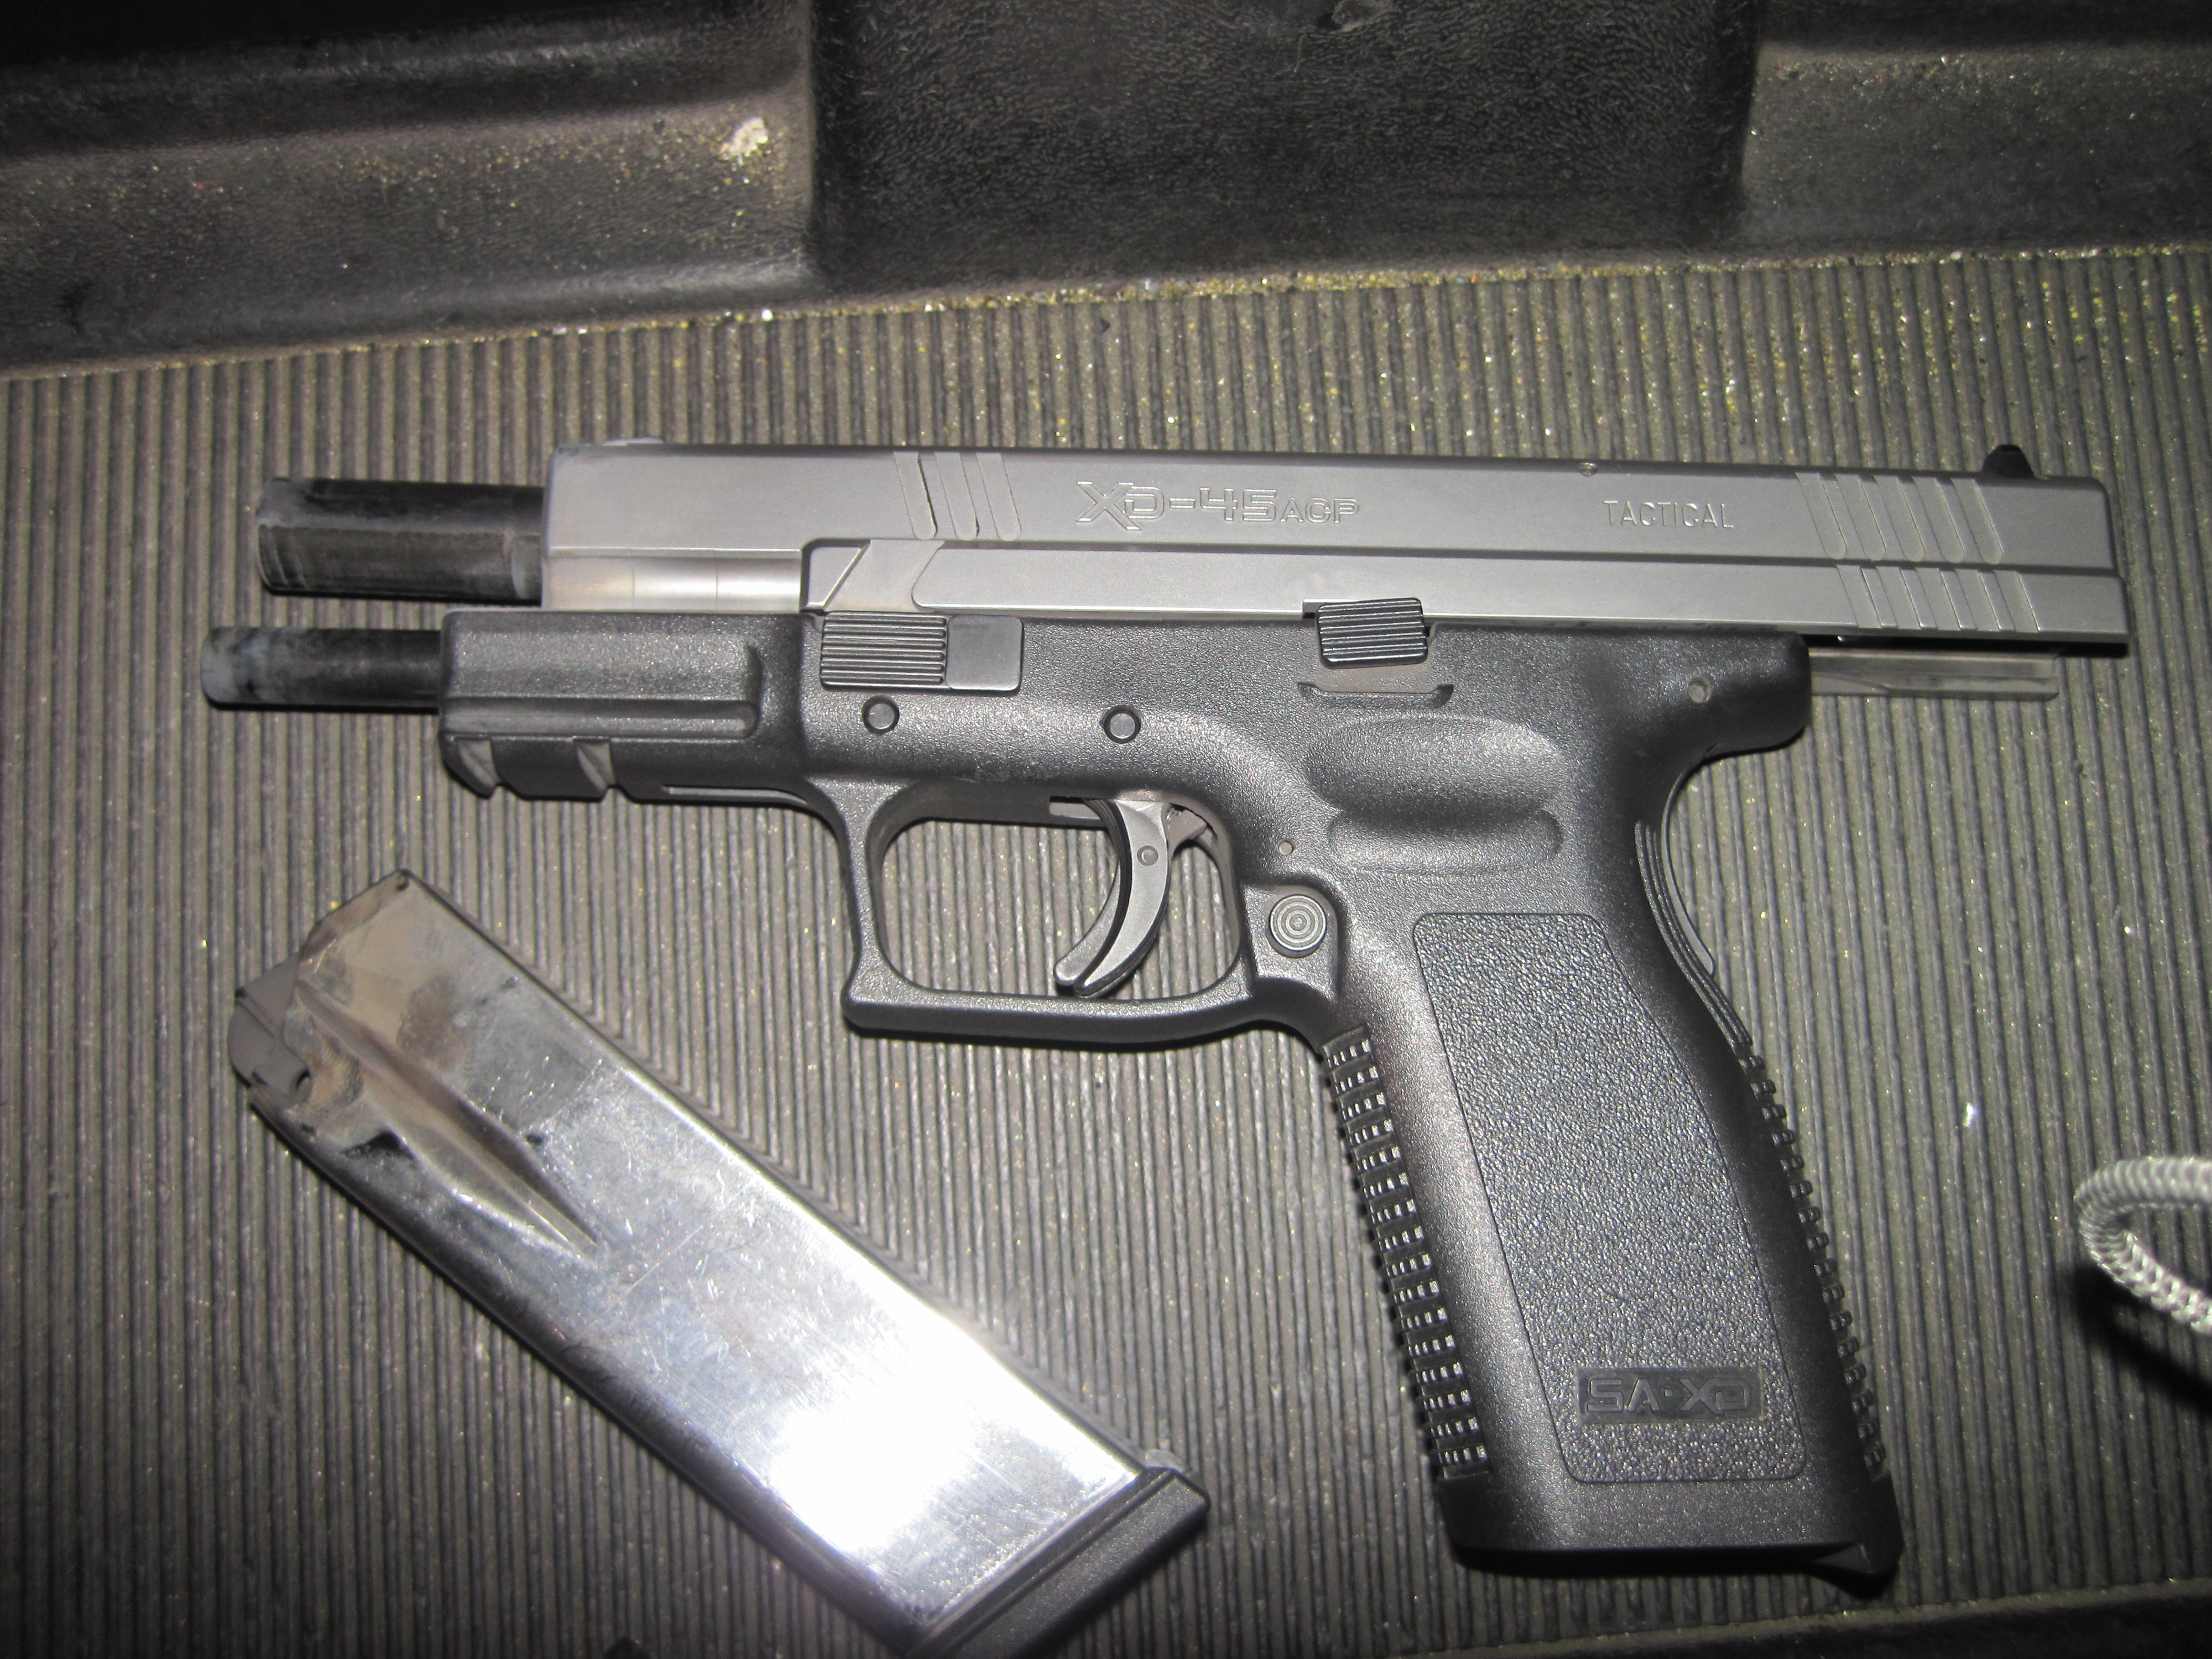 The third and final gun we played with was the Springfield XD Tactical in